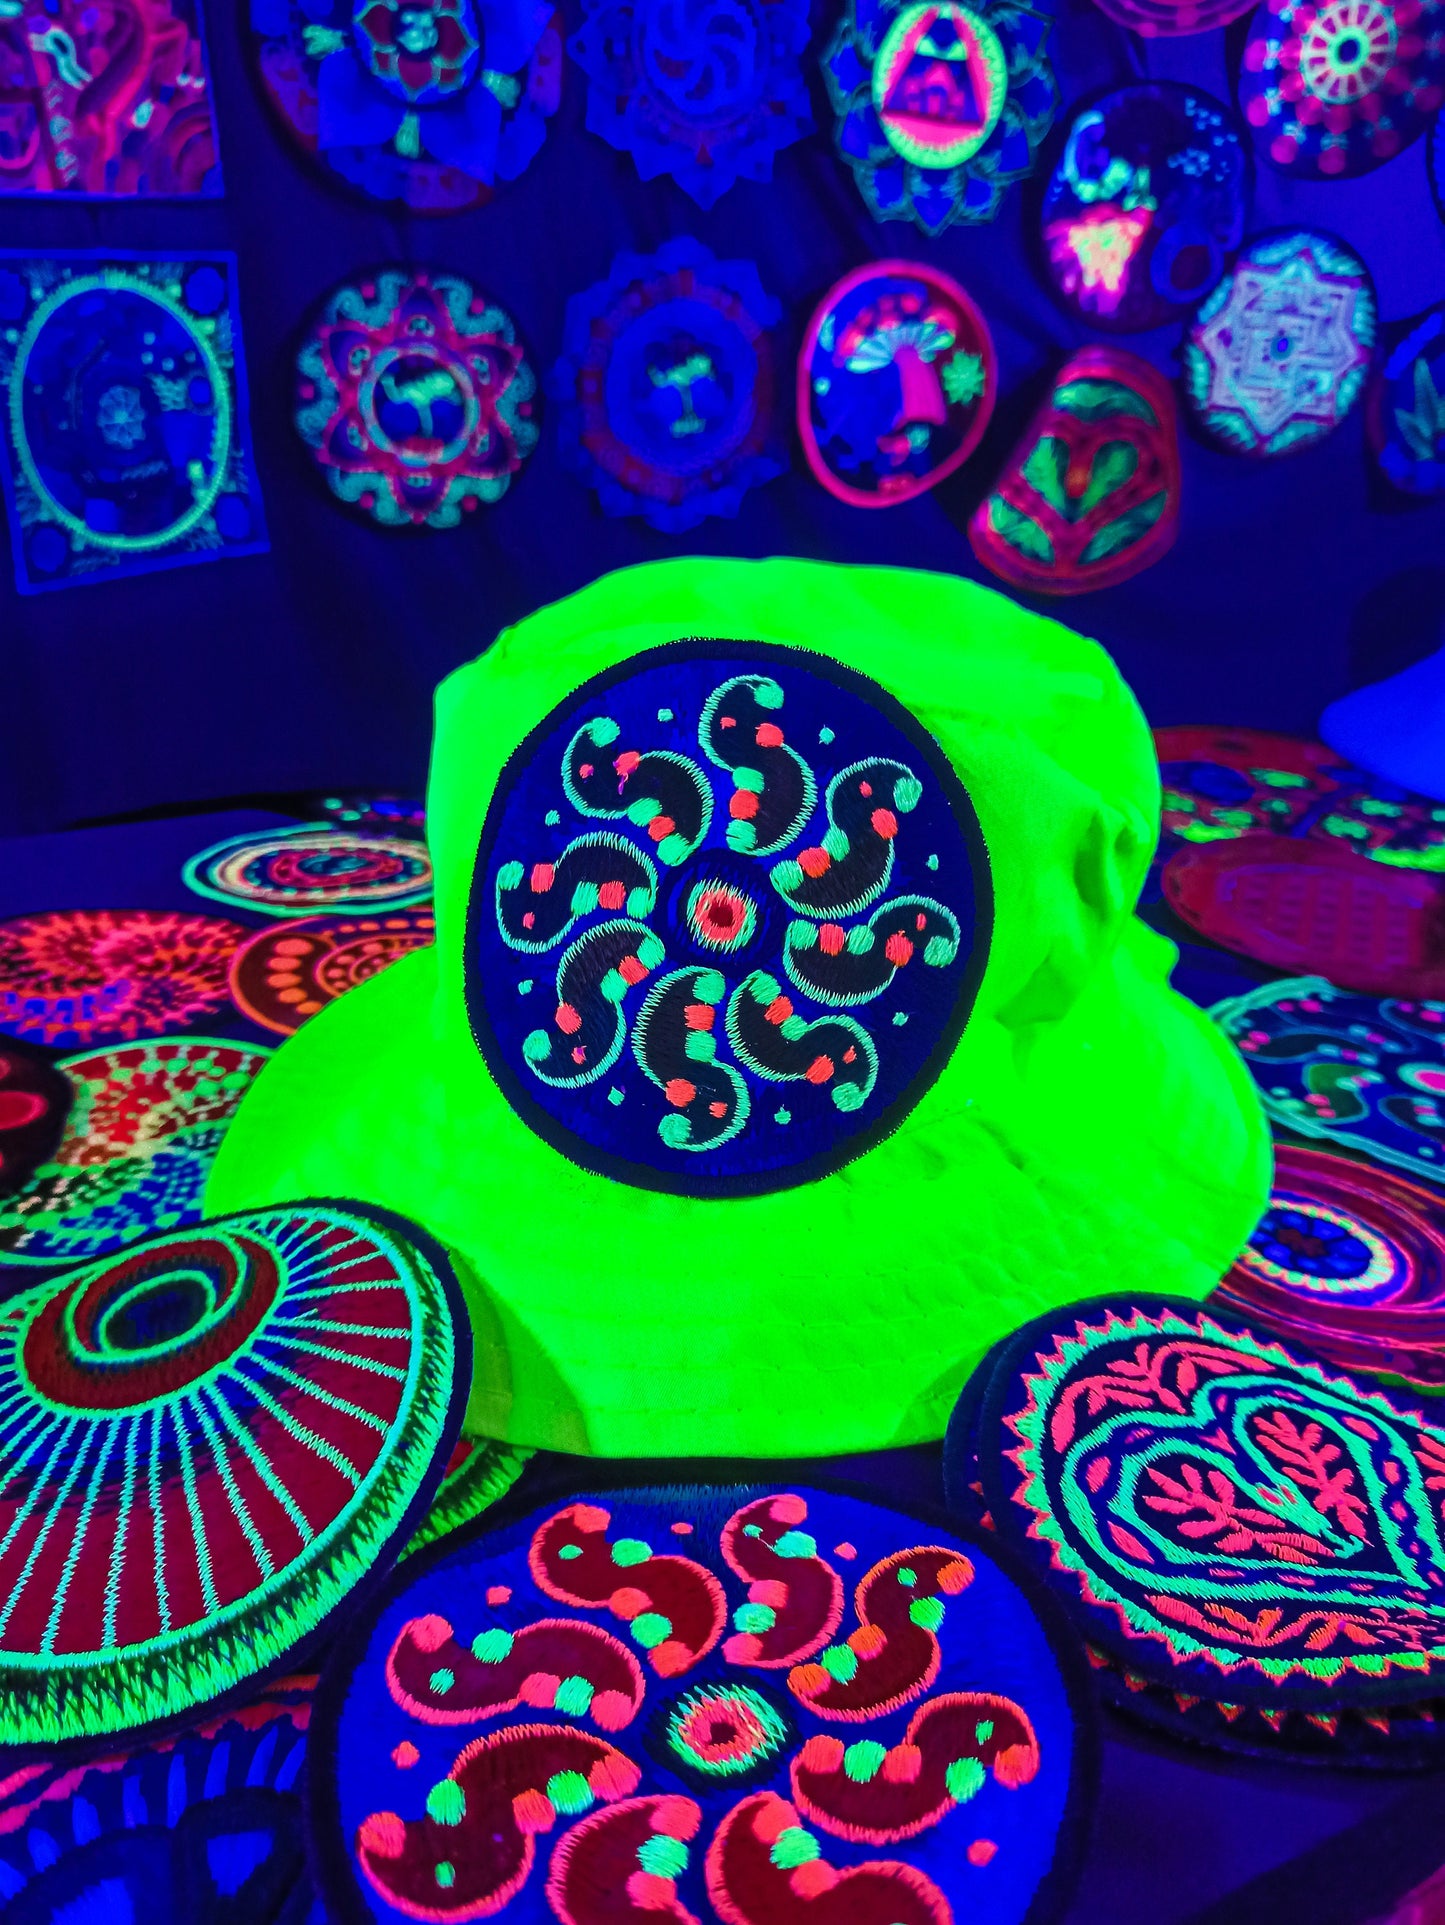 Tidcombe Crop Circle Fisher Hat UV blacklight glowing with embroidery patch sacred geometry alien art extraterrestrial beauty psychedelic